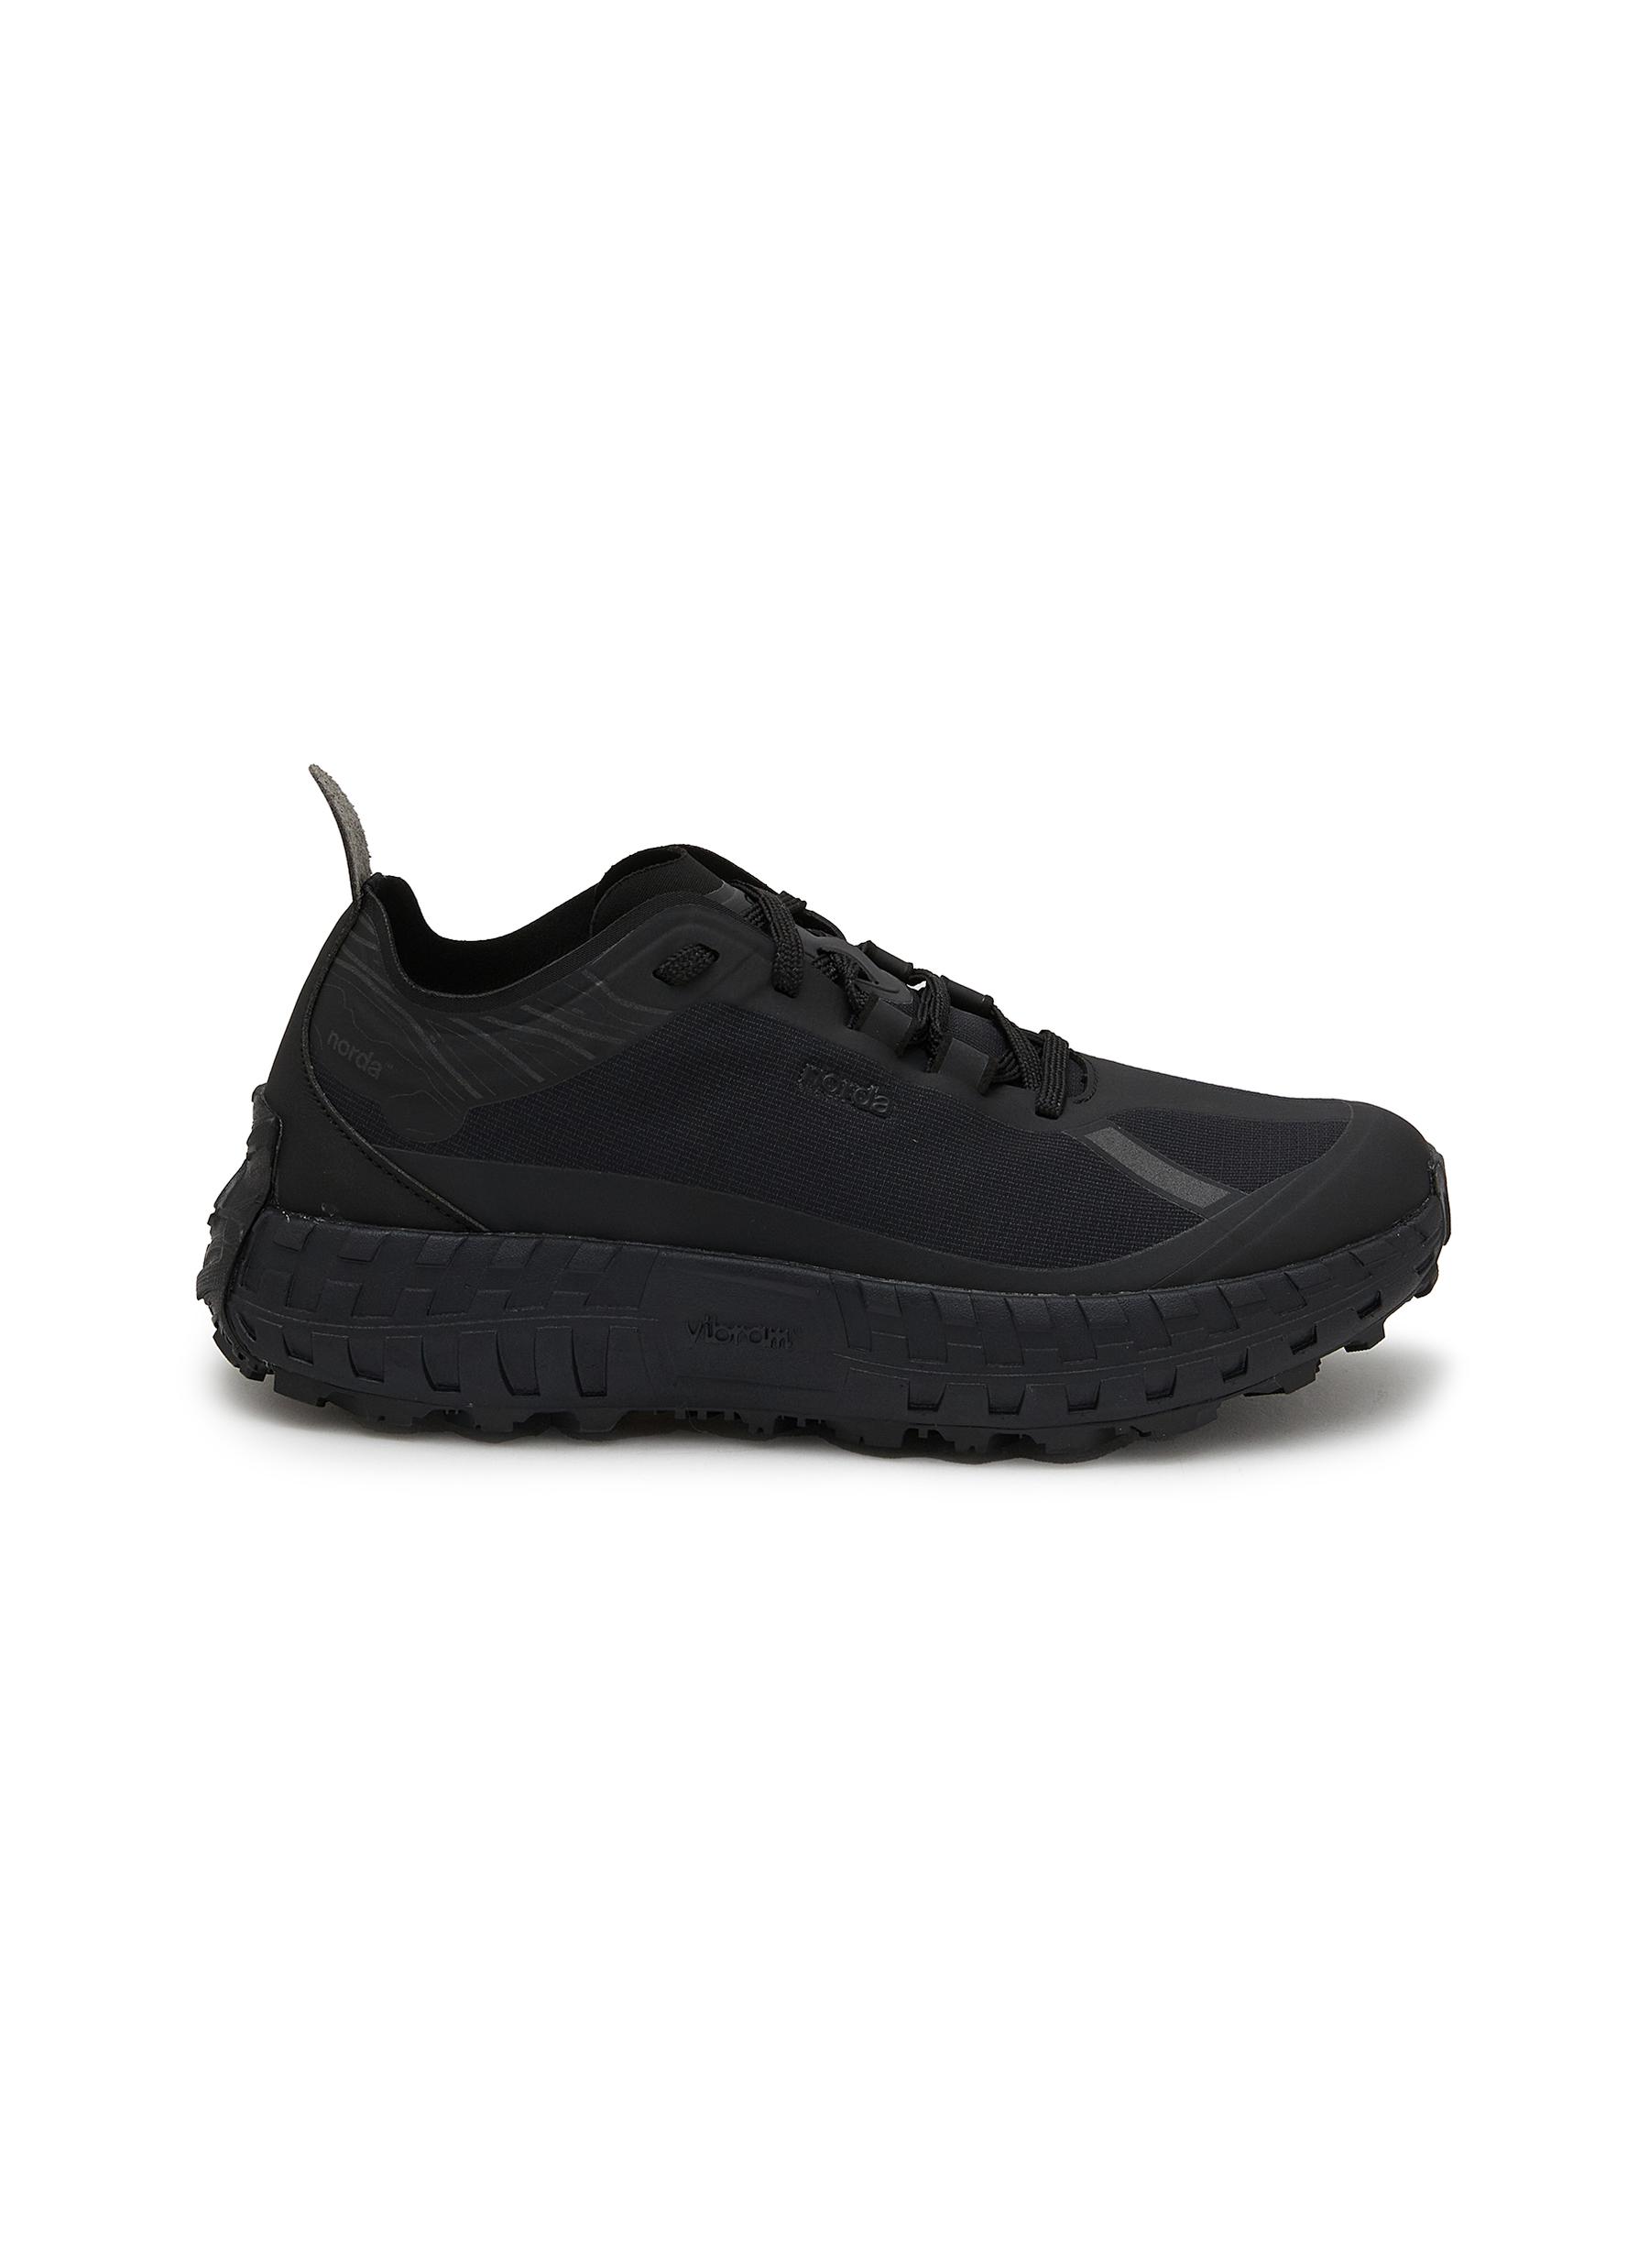 Norda 001 G+ Low Top Lace Up Sneakers